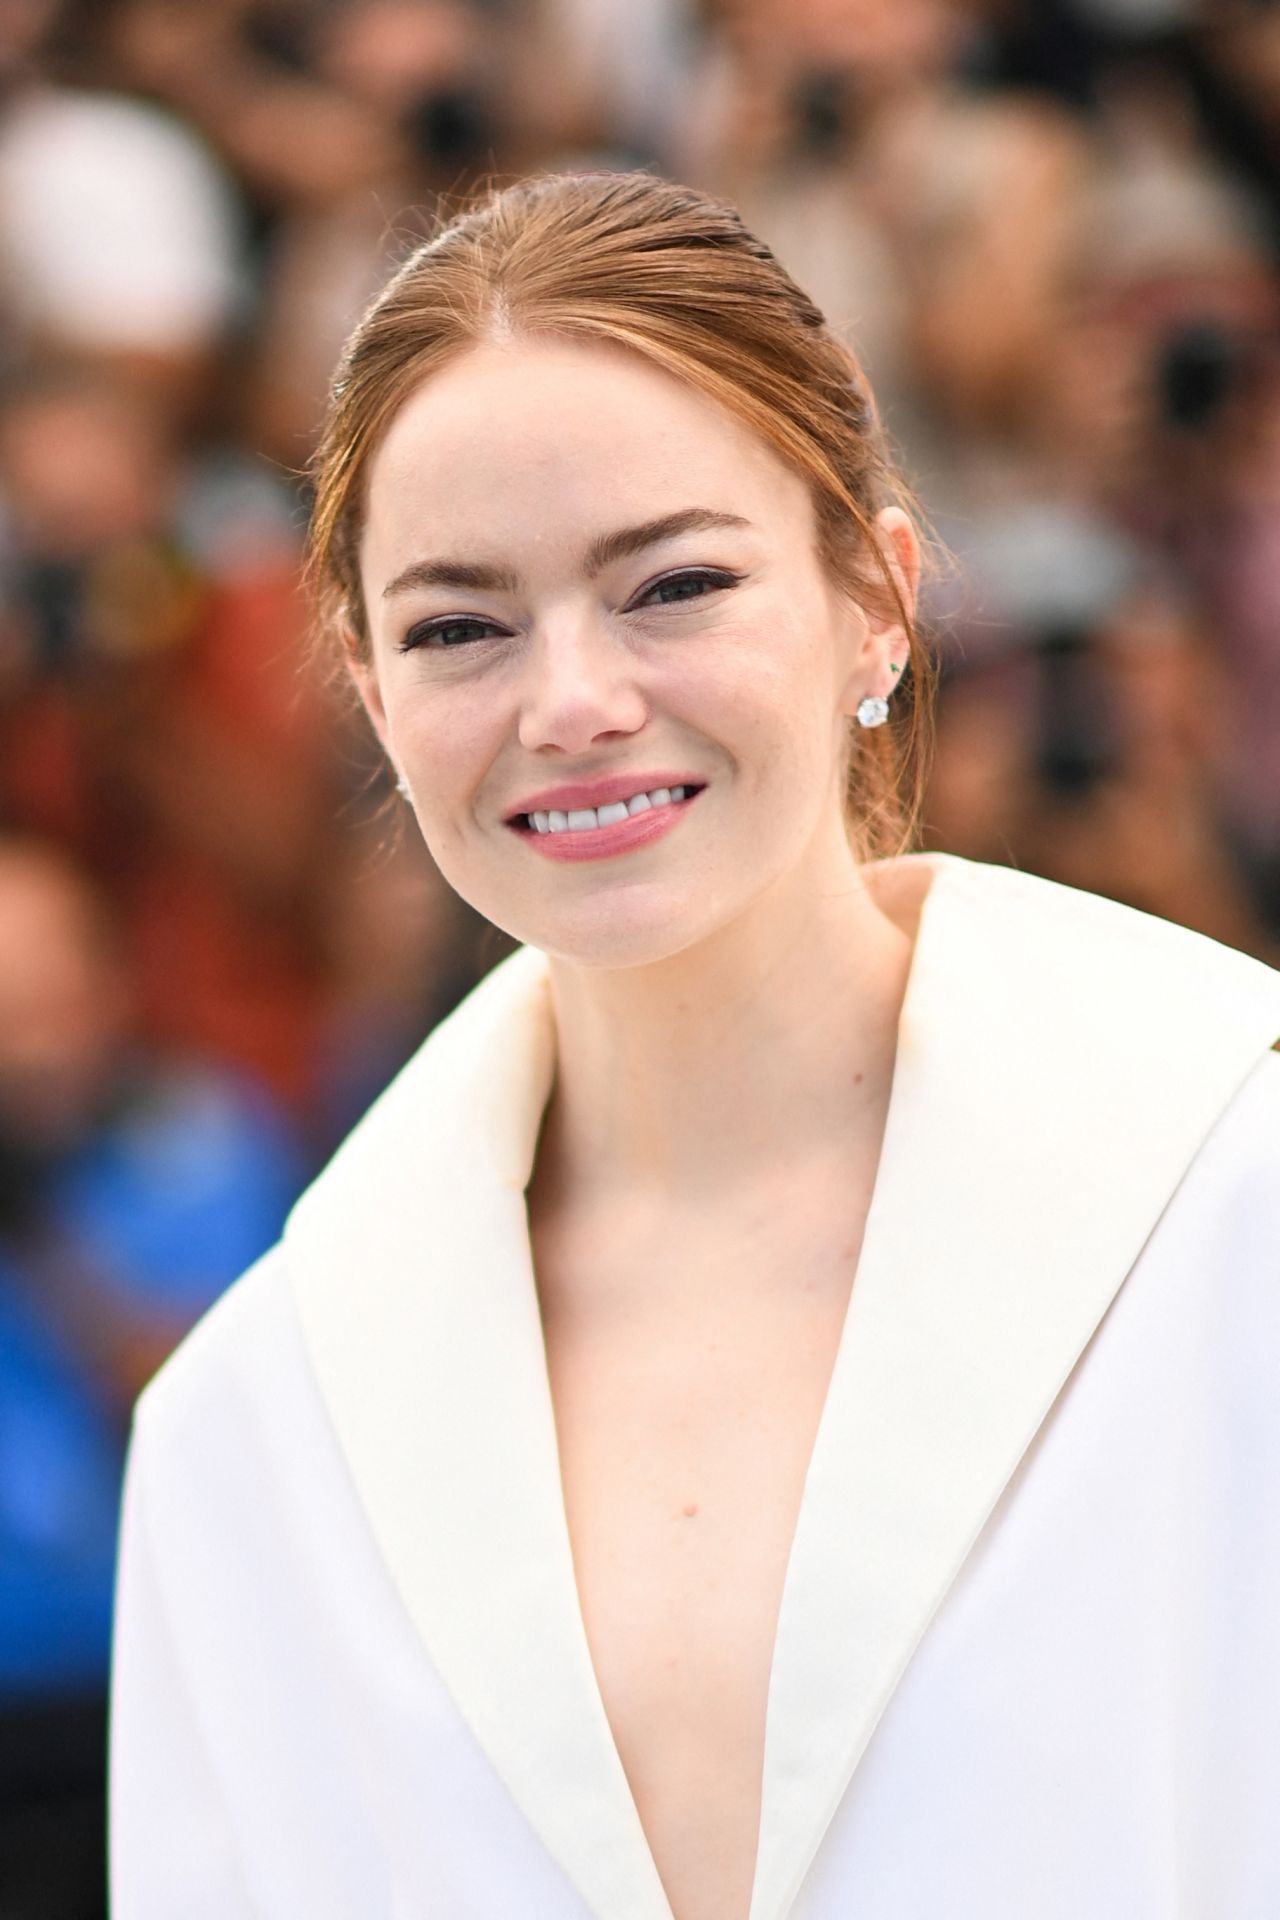 EMMA STONE AT KINDS OF KINDNESS PHOTOCALL IN CANNES FILM FESTIVAL05